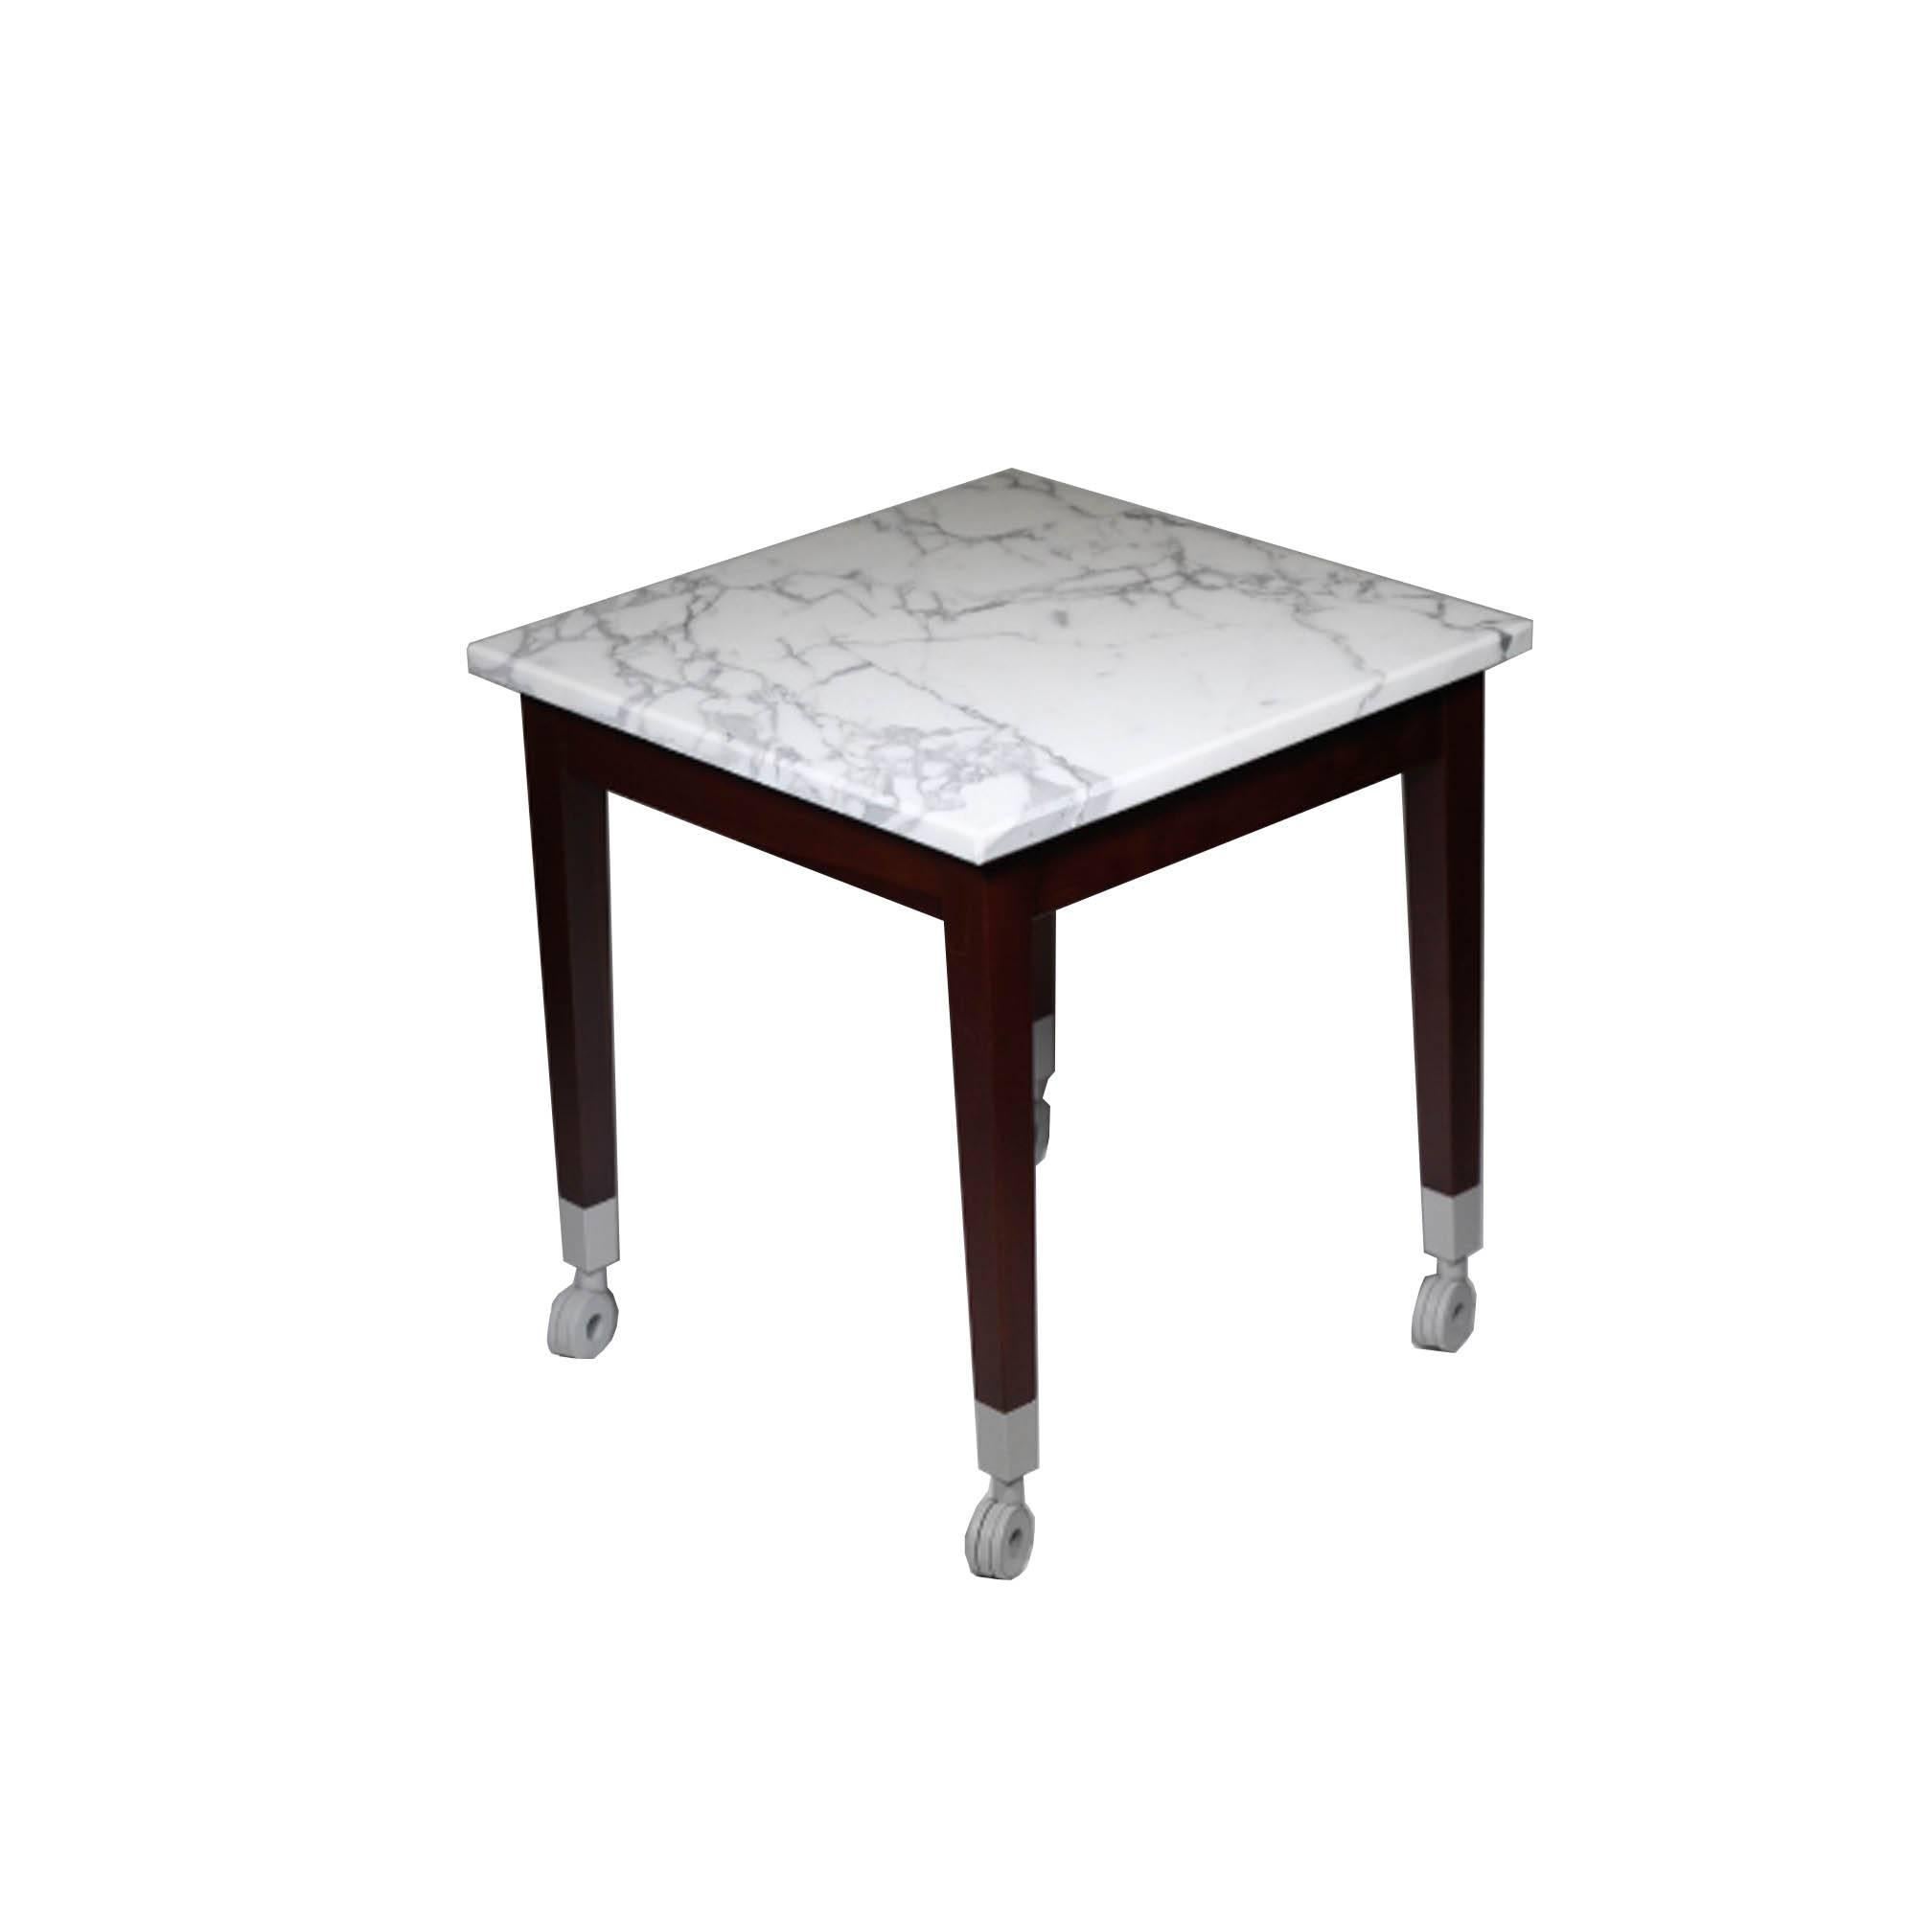 Designed: 1997.

Neoz small table.

Origin: Italy.

Marble topped small table with structure in solid mahogany wood. Leg teminals in aluminium casting and castors in nylon. 

Top in Calacatta Carrara marble.